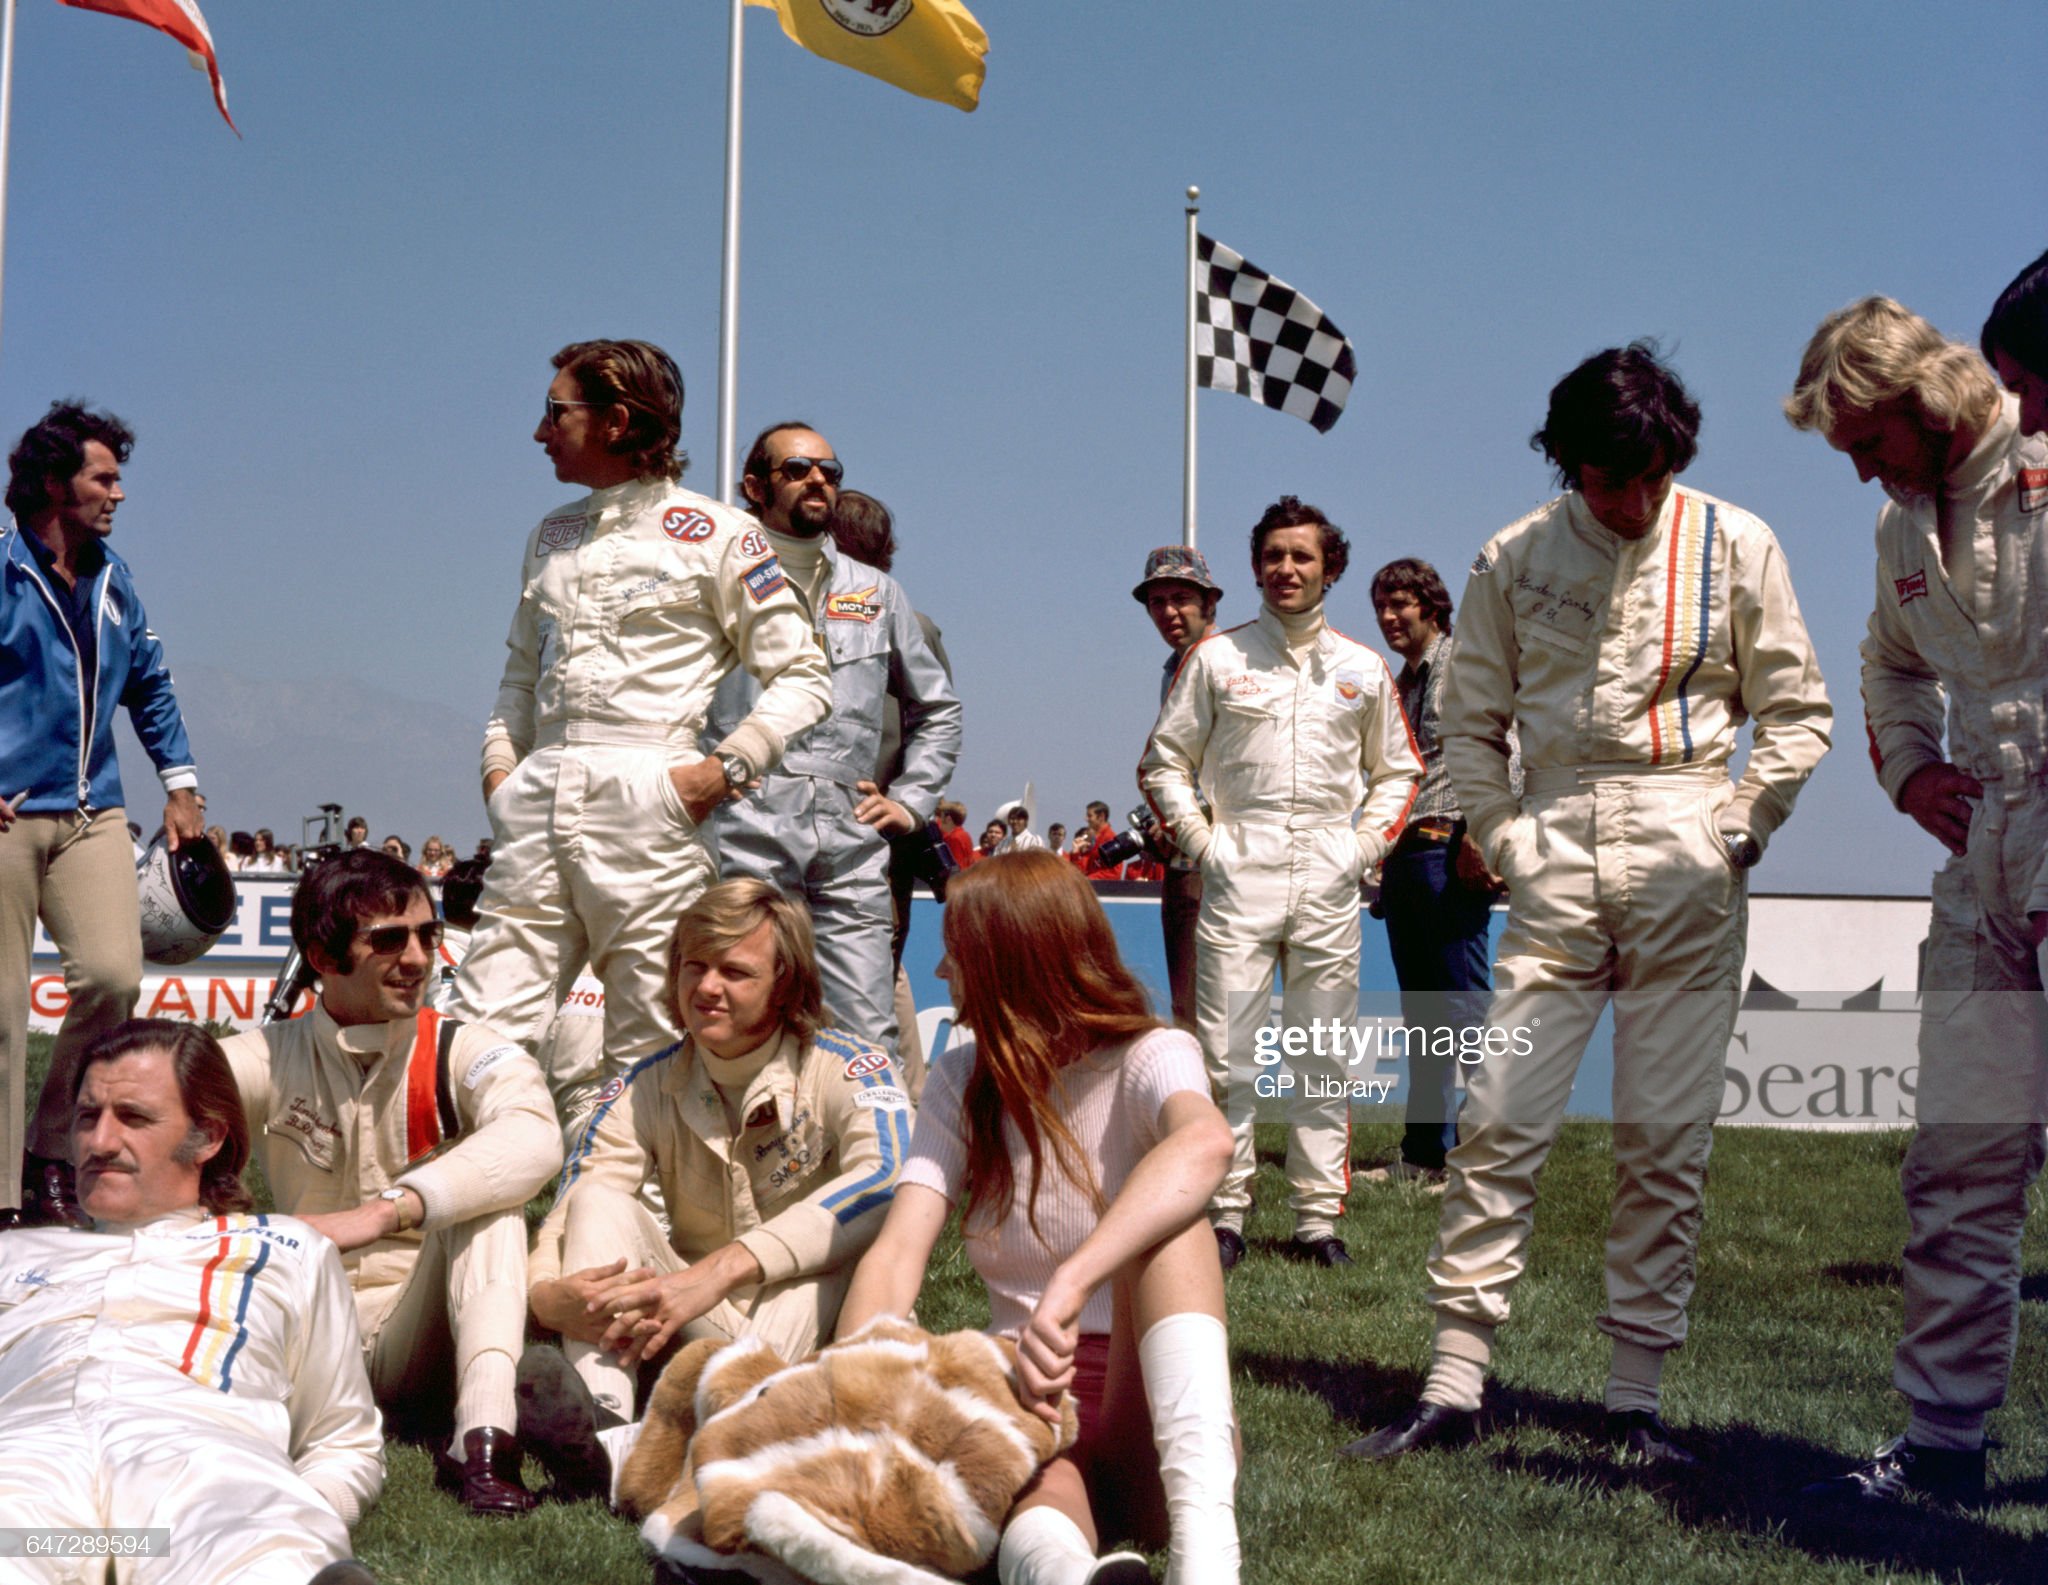 Jo Siffert, Ronnie Peterson, Henri Pescarolo and Jacky Ickx, 28 March 1971, Ontario. 